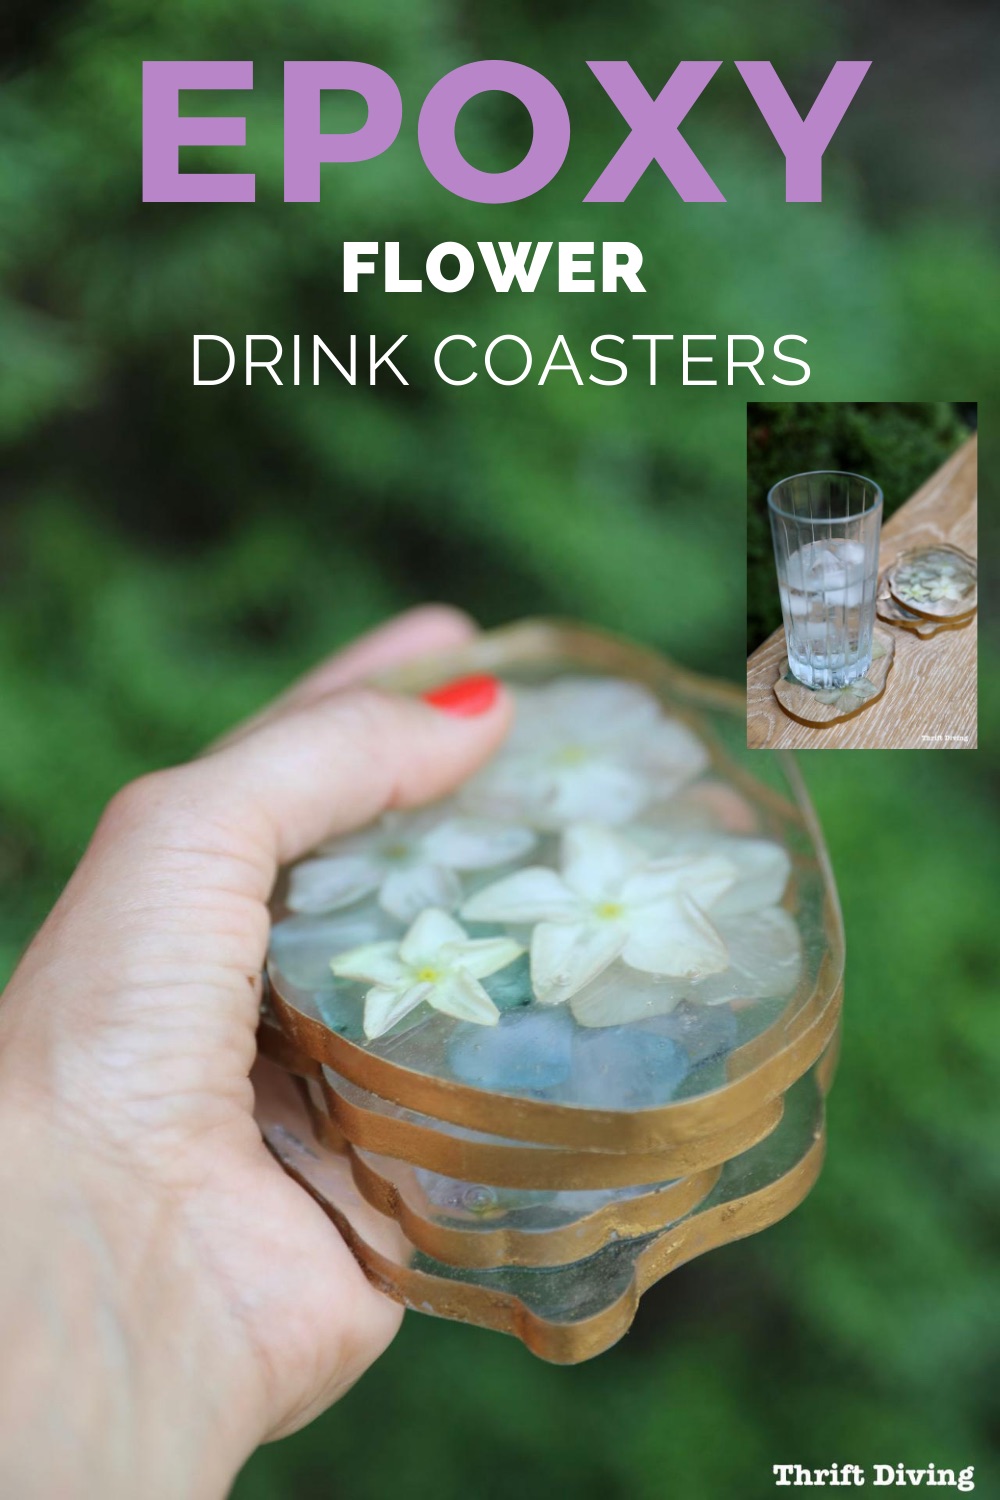 Making epoxy flower art drink coasters - Drink coasters are a fun and easy DIY craft project and gift idea! - Thrift Diving